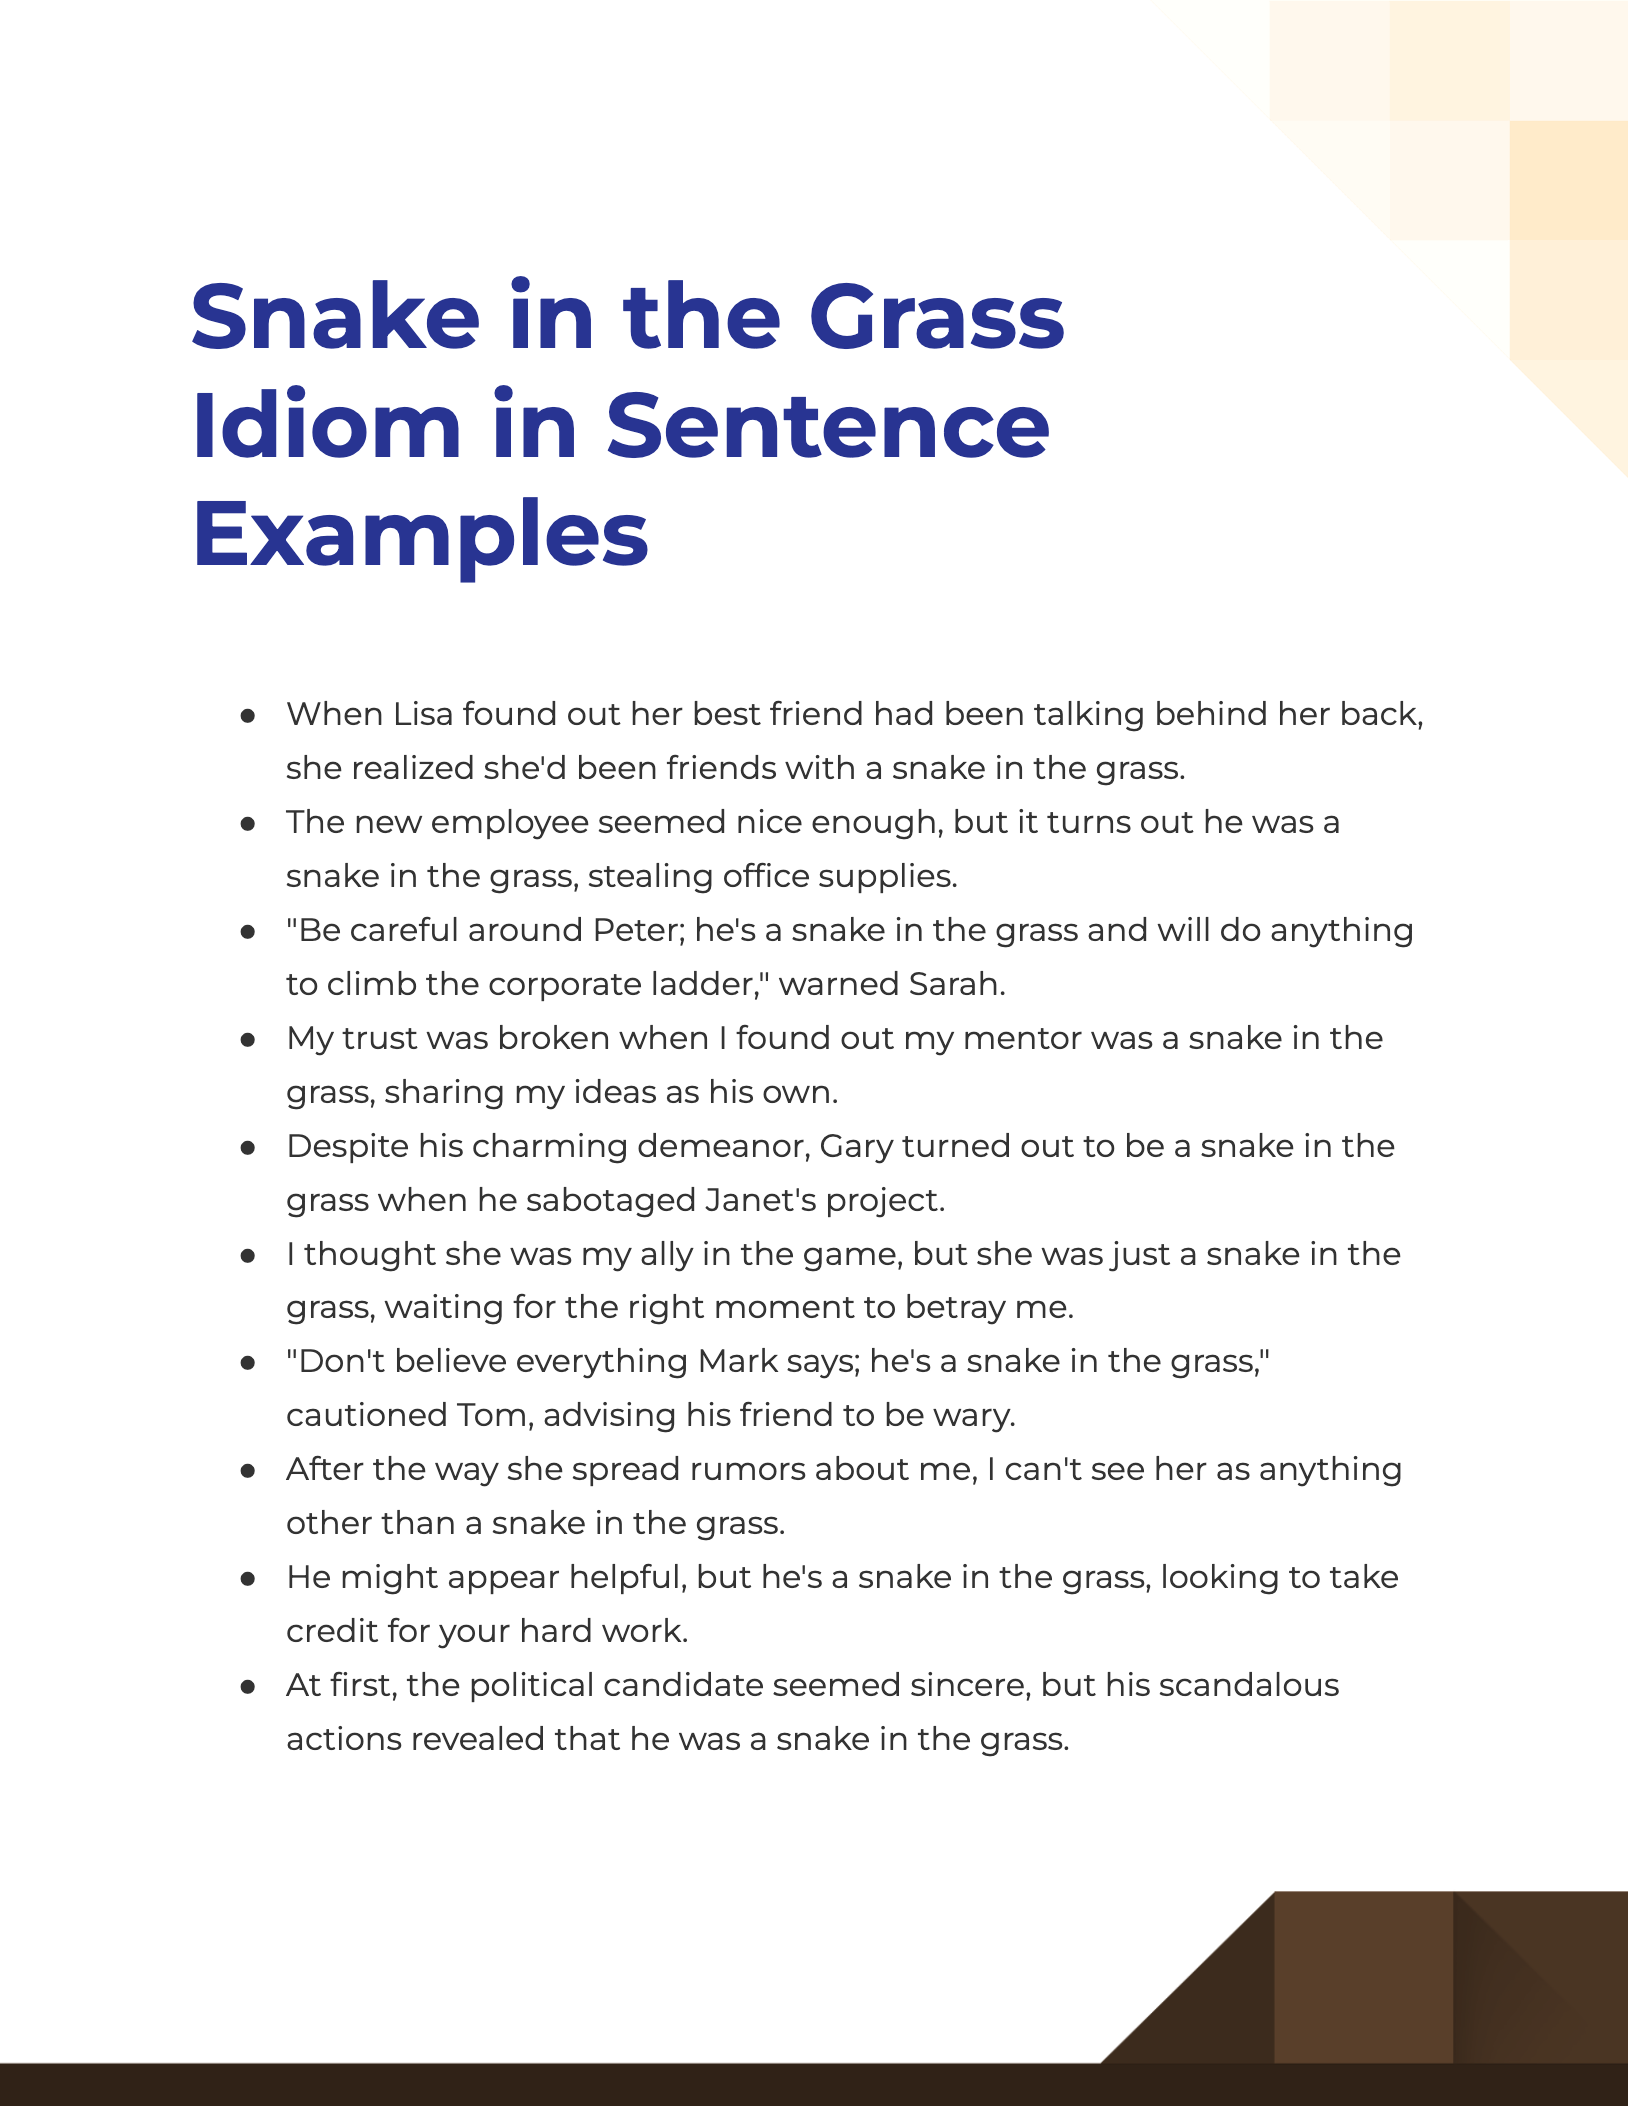 snake in the grass idiom1